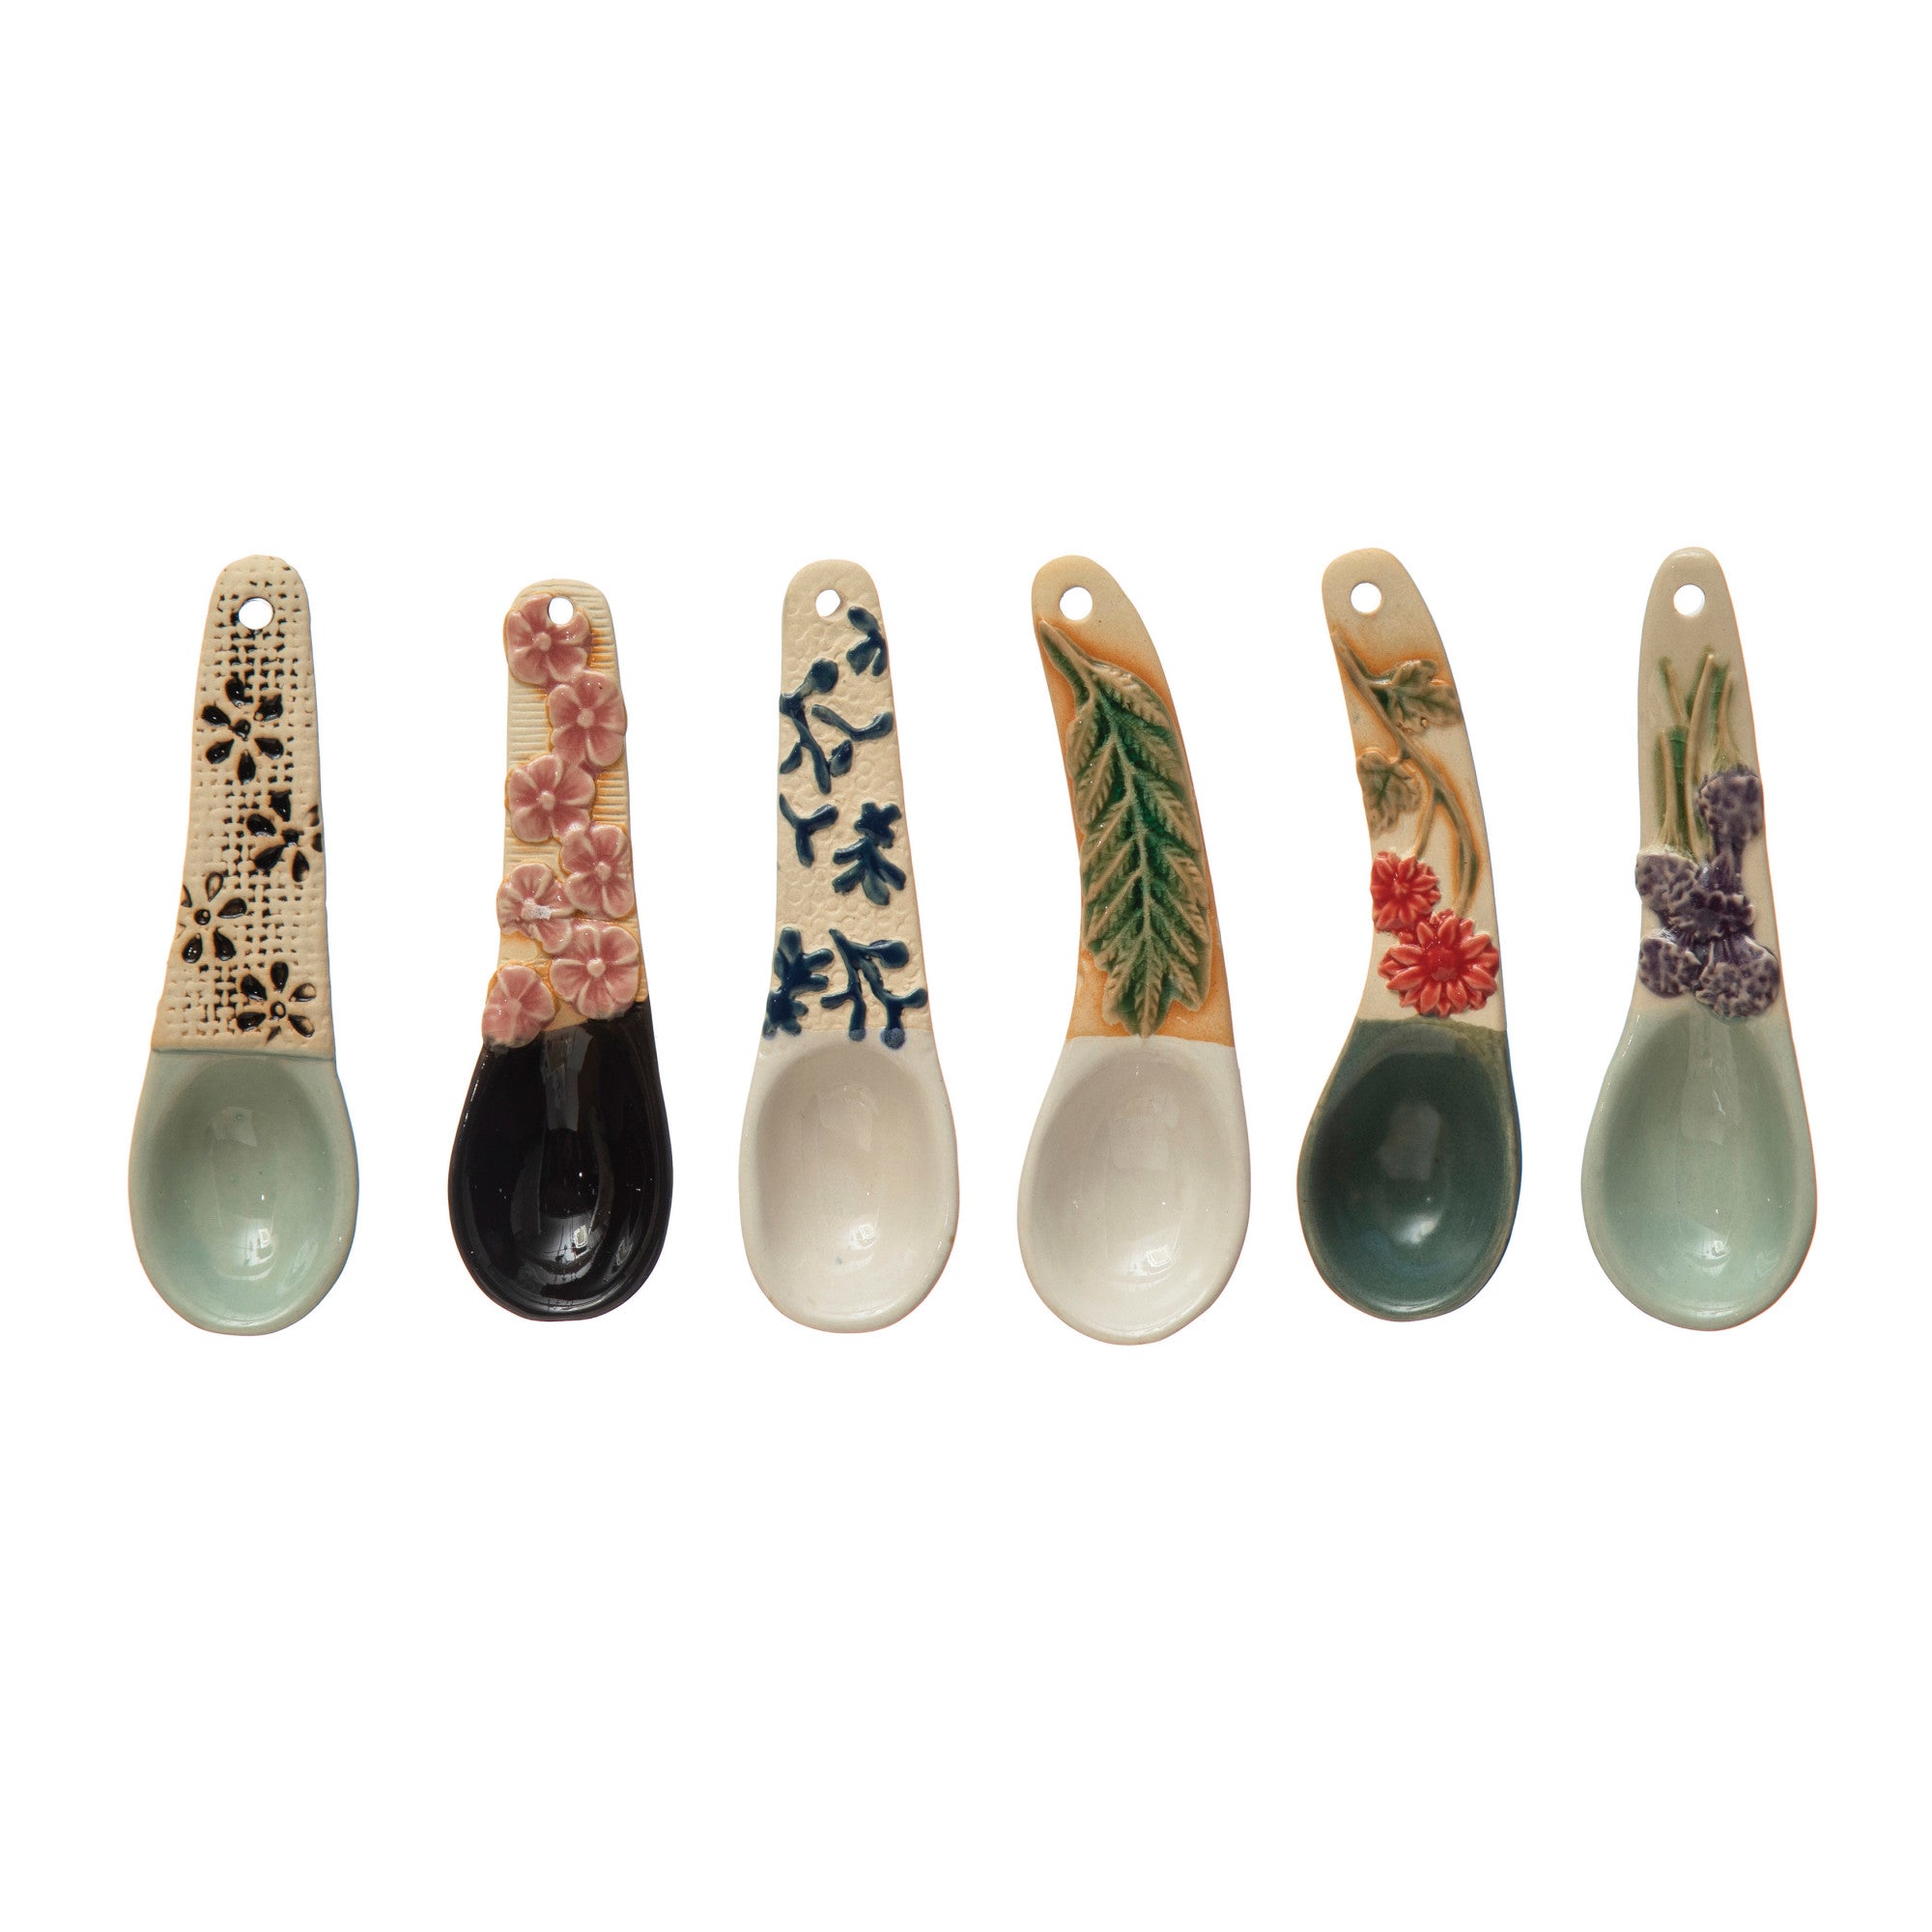 Hand-Painted Spoon